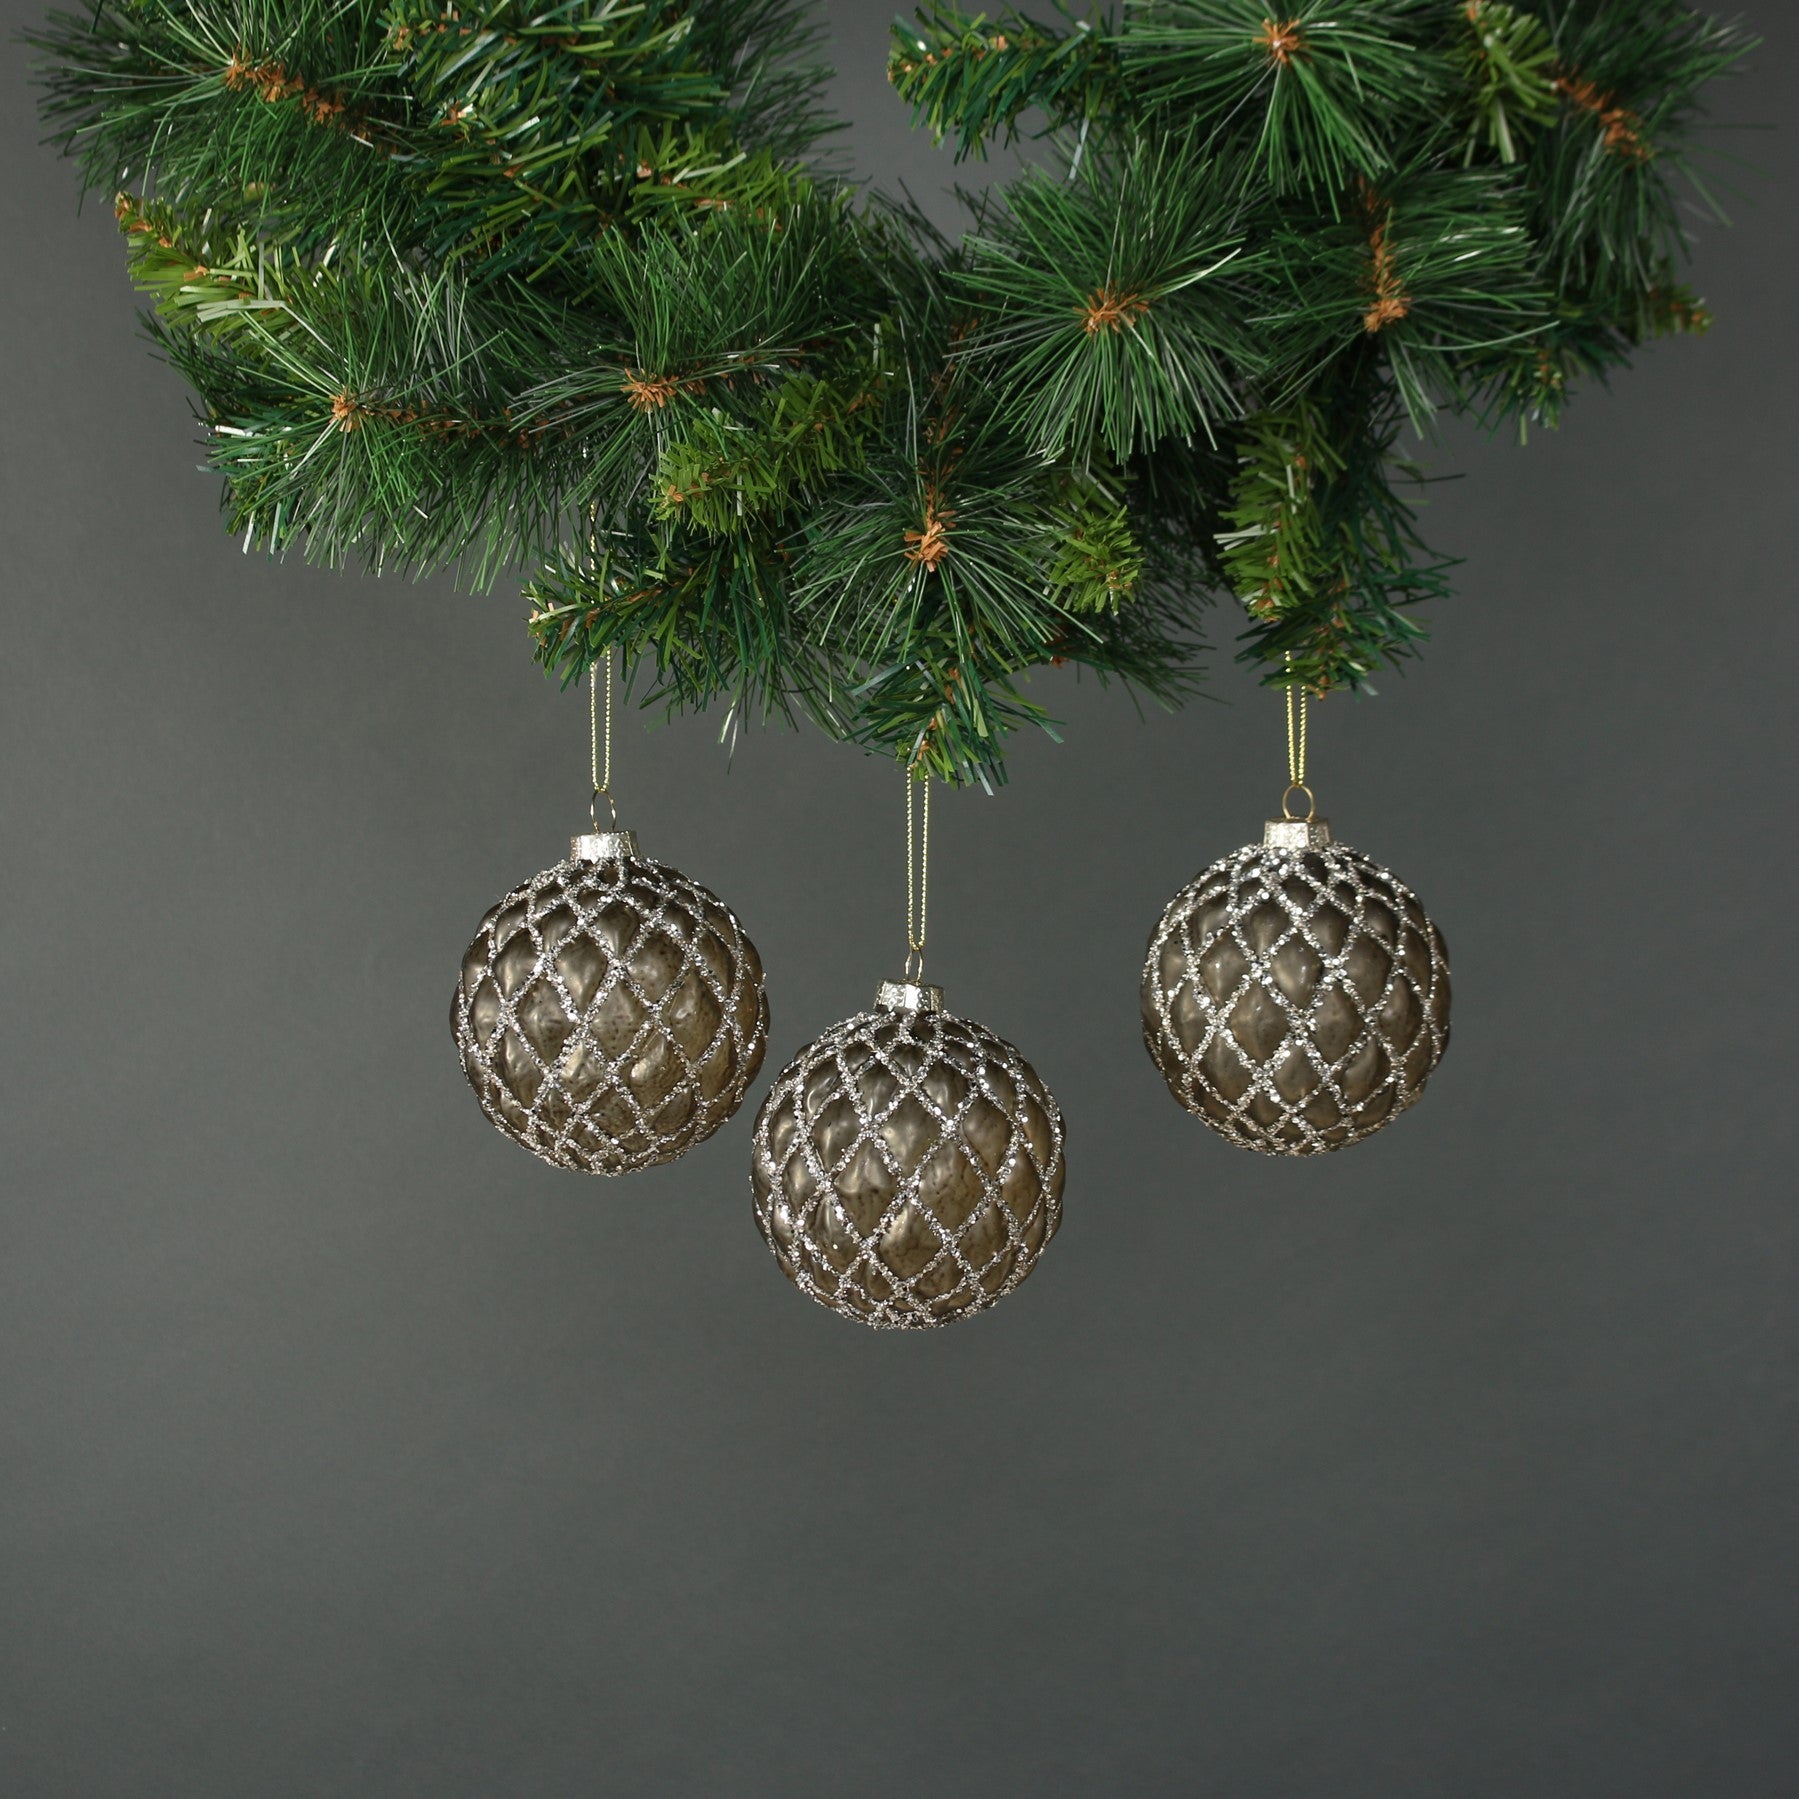 View Asteria Glass Bauble 8cm Set of 4 information